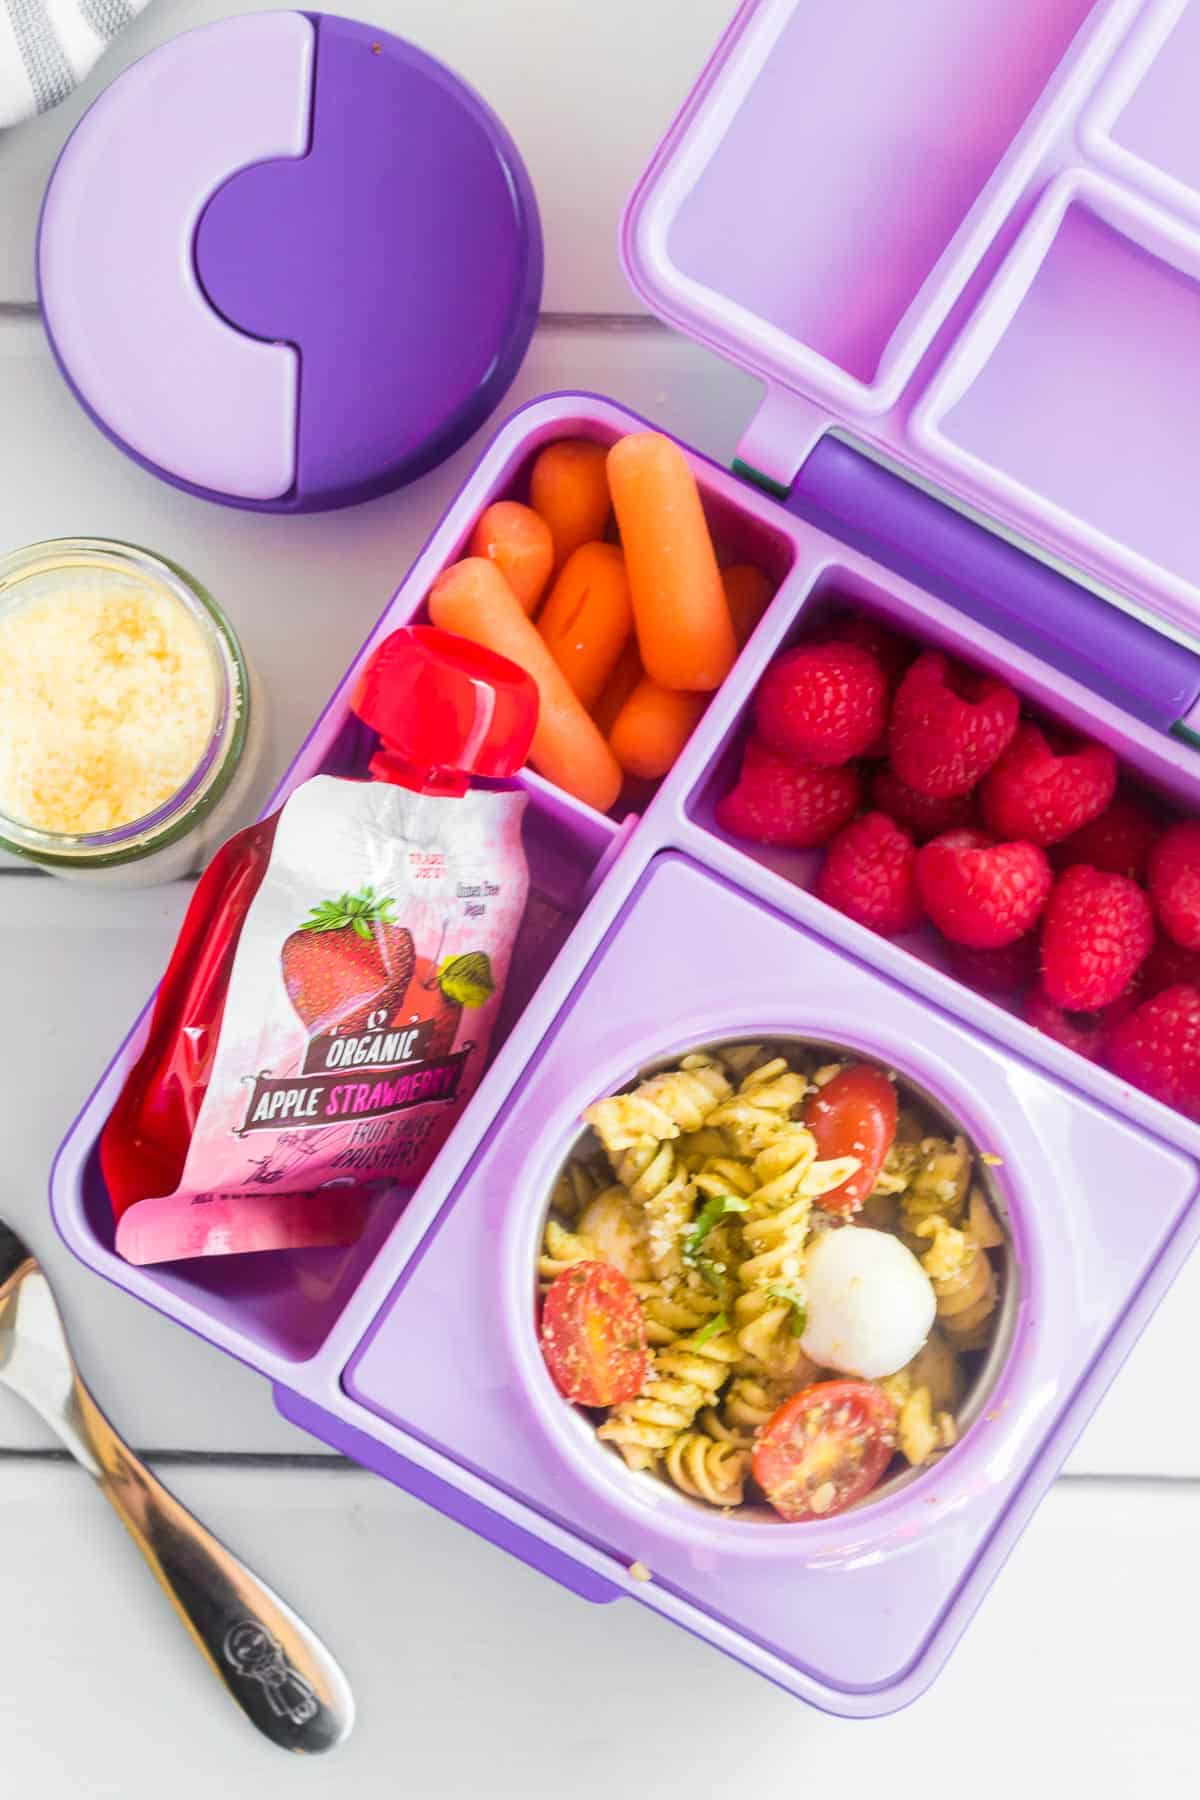 An open purple kids bento lunchbox full of pesto pasta salad, baby carrots, raspberries and an applesauce pouch from overhead.